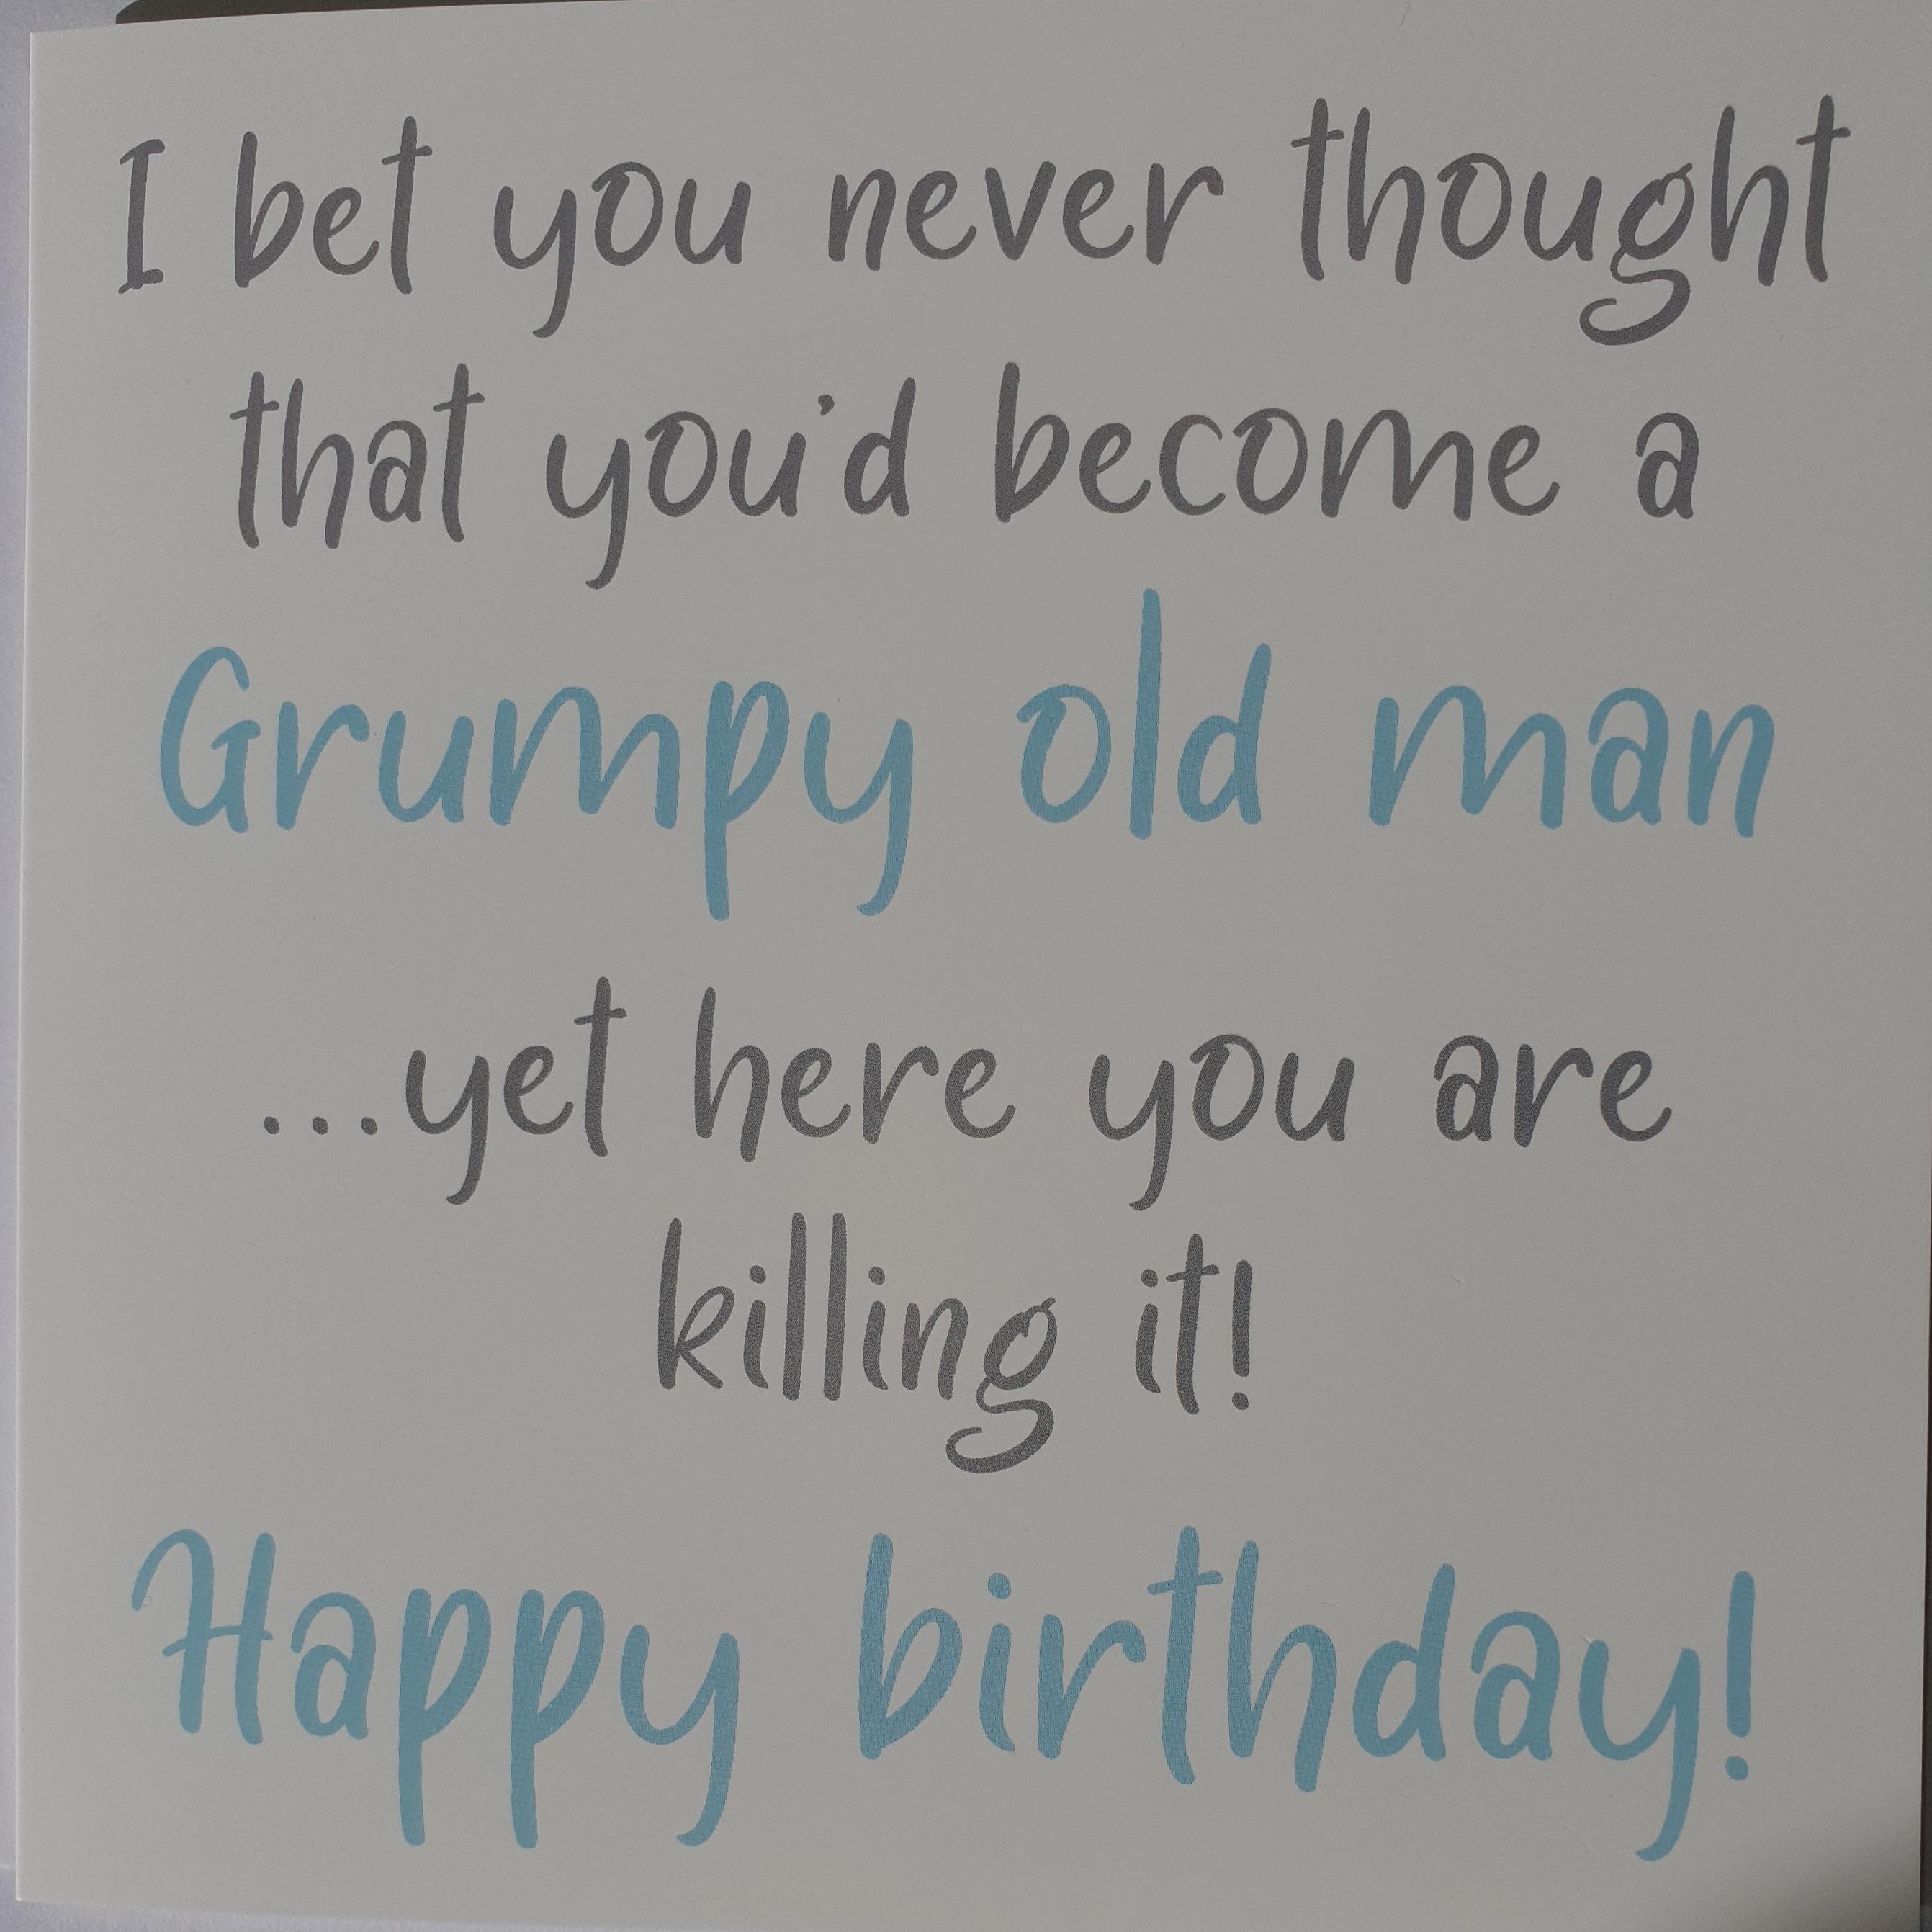 White greetings card with grey & blue  print 'I bet you never thought you'd become a  Grumpy old man....Yet here you are killing it', Happy Birthday!